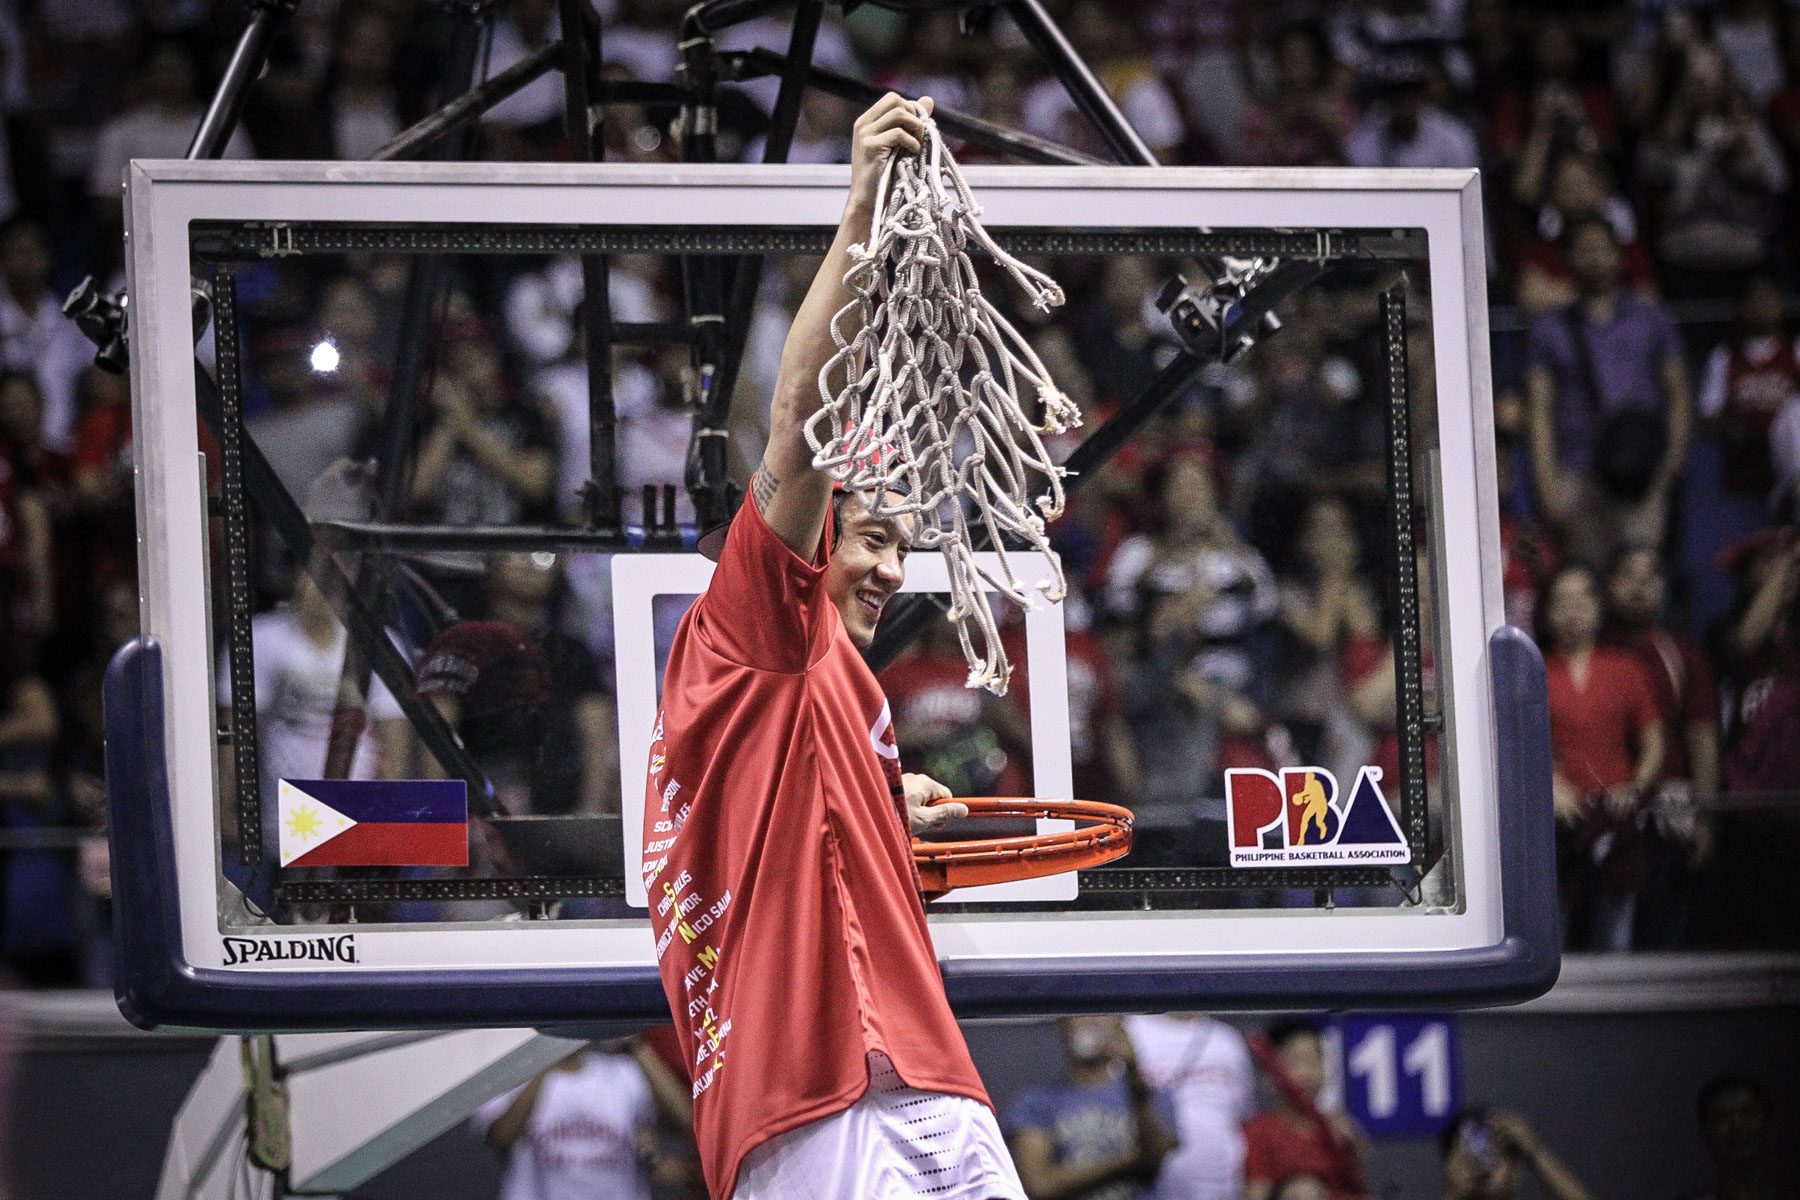 Future uncertain for Helterbrand after Ginebra title